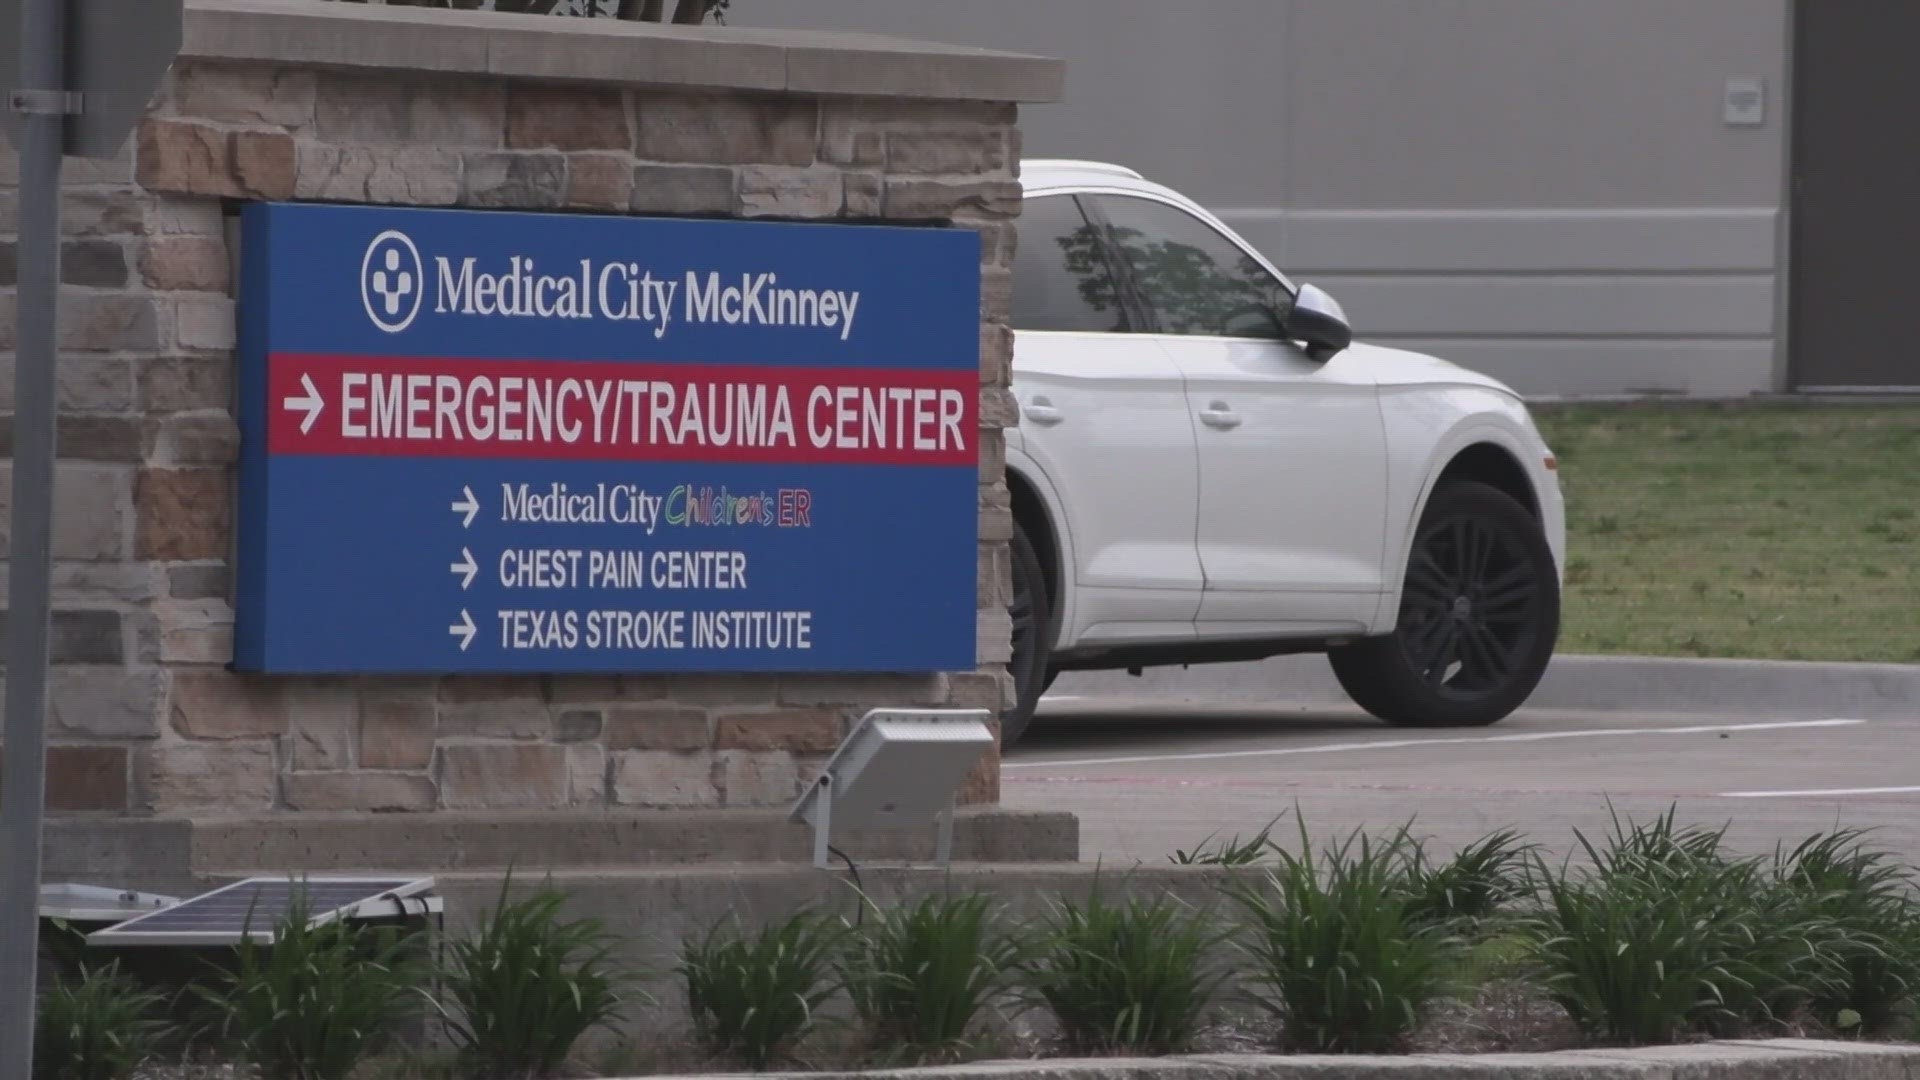 The final patient didn’t want a celebration, but Medical City said there were plenty of tears and hugs between the patient and staff.